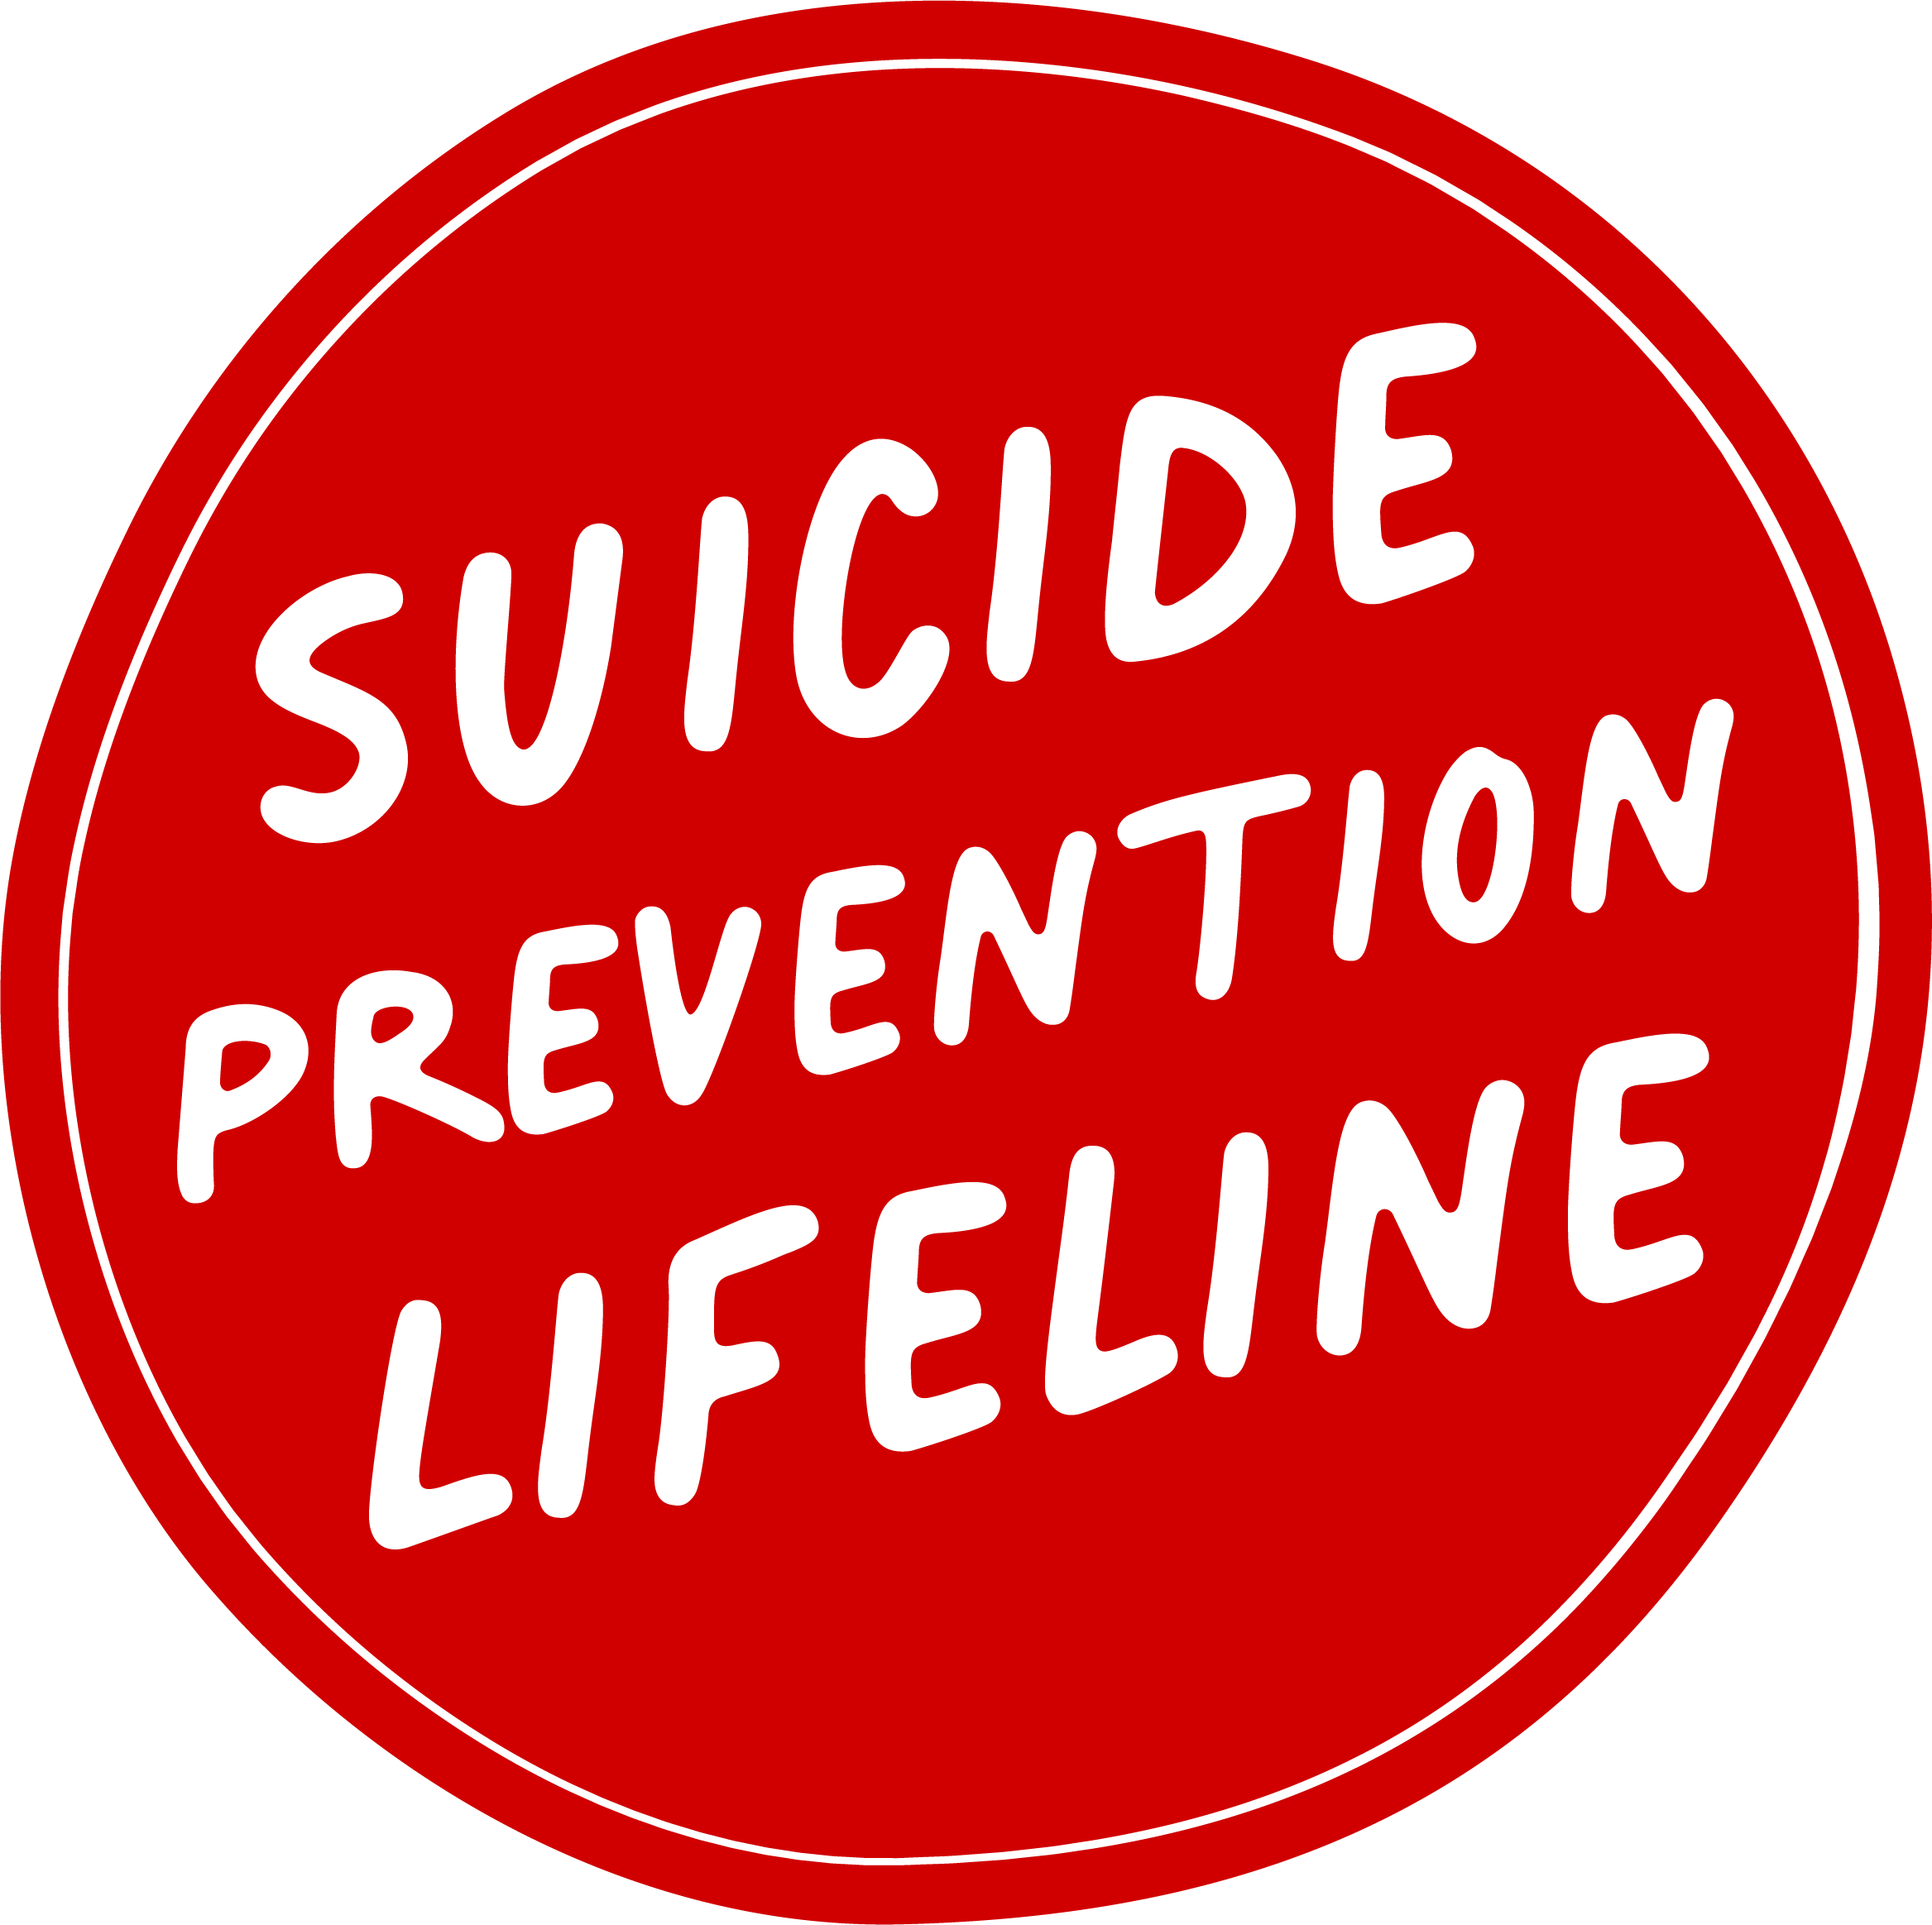 Suicide Prevention Lifeline in handwritten text on red circle